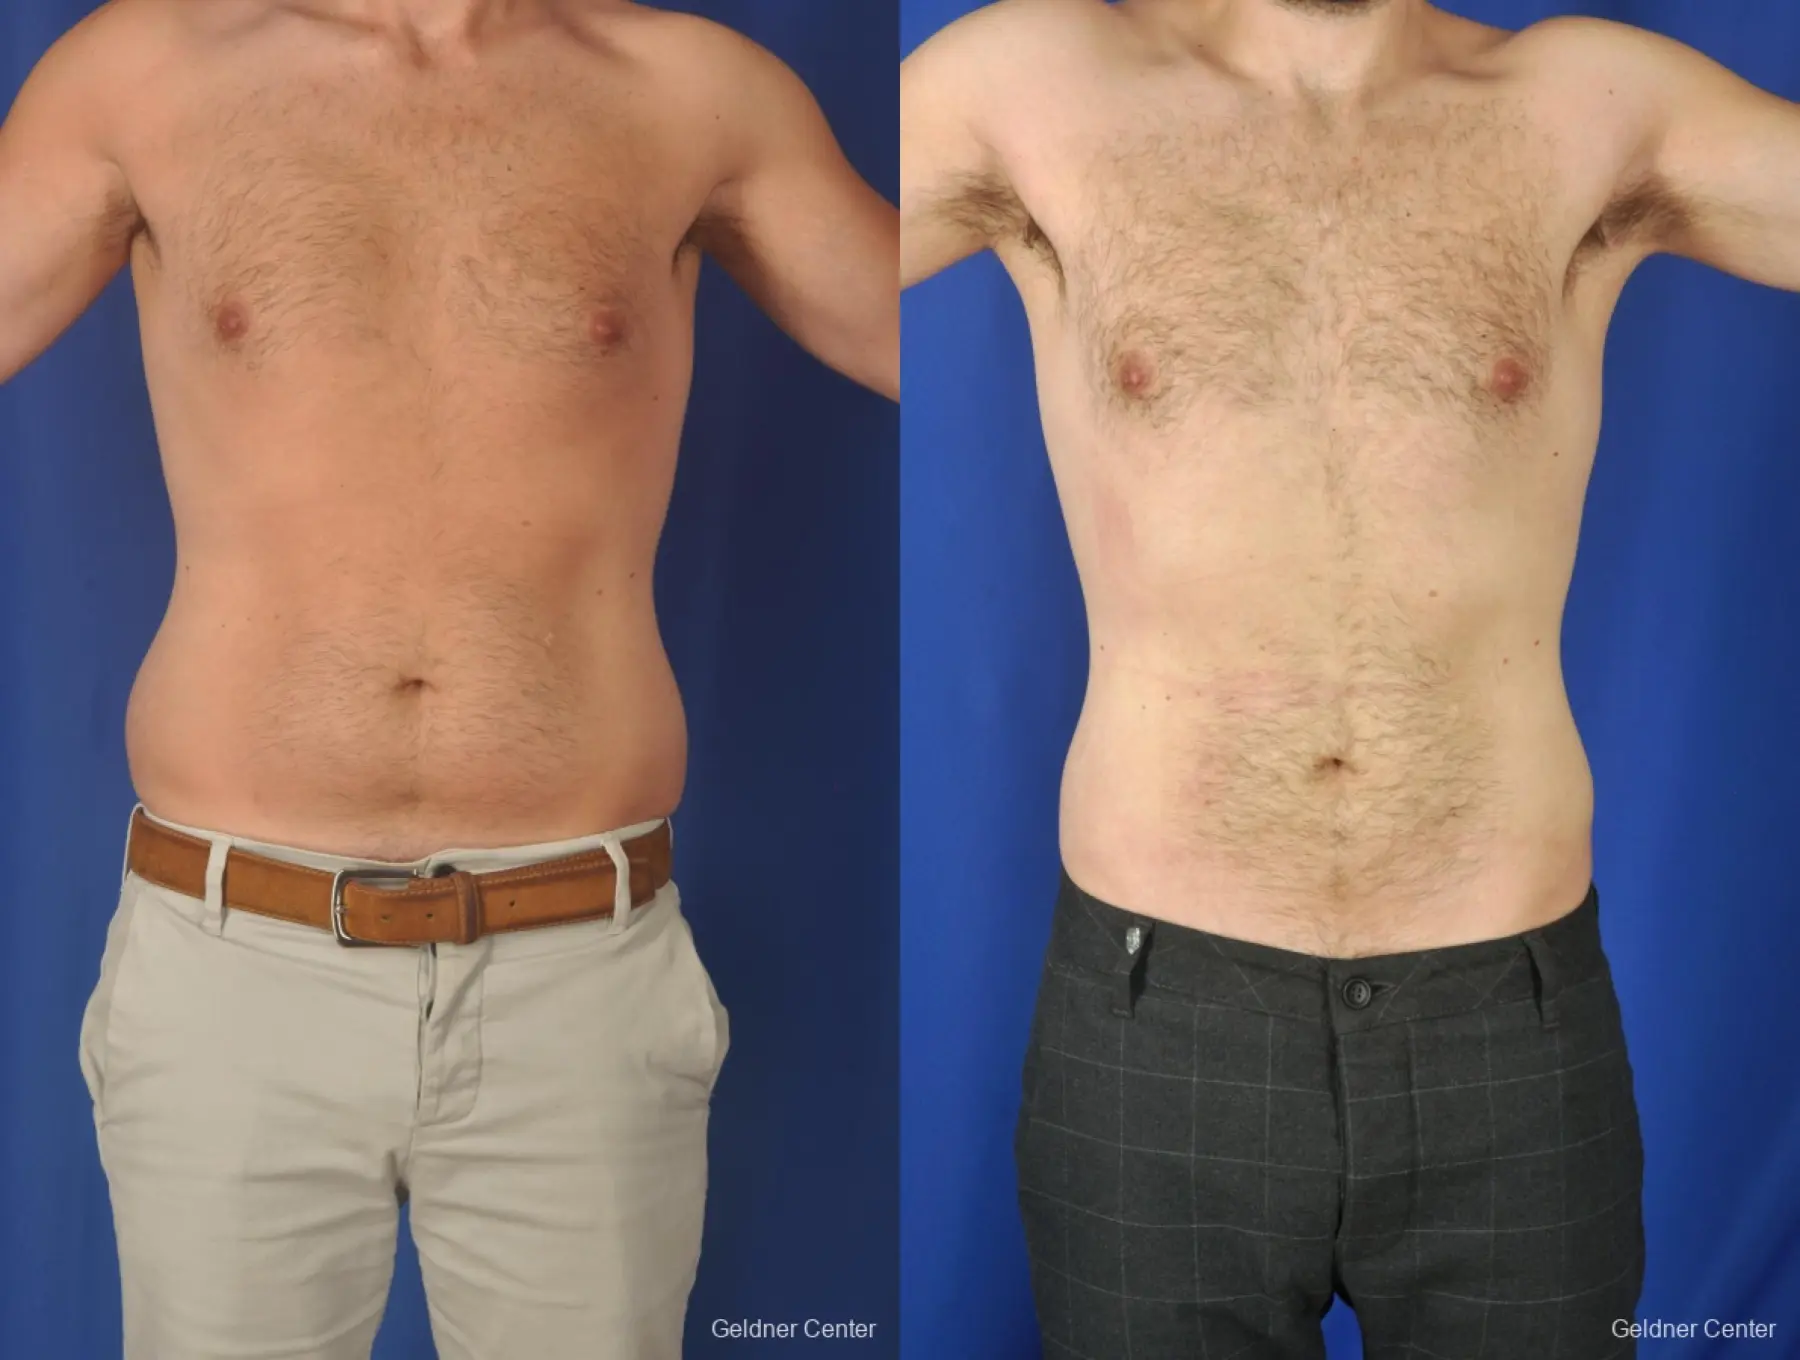 Liposuction For Men: Patient 3 - Before and After 1